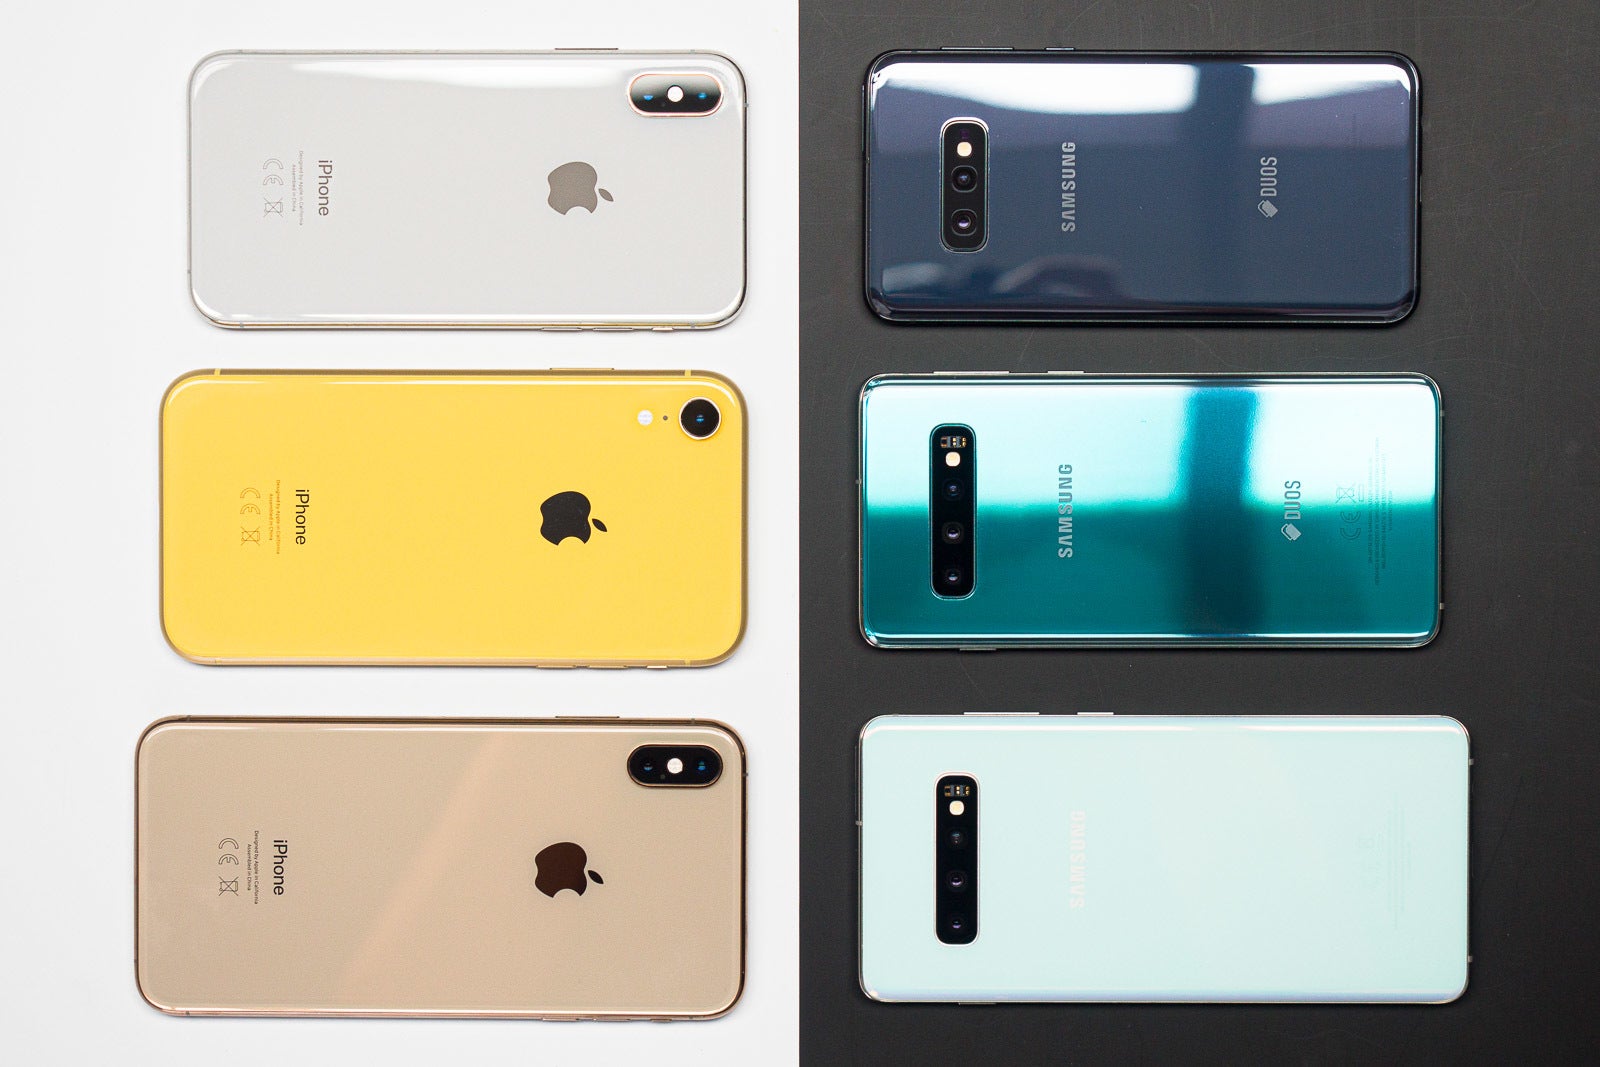 Both Apple and Samsung now have three flagships with different sizes - Why do phone makers let these design mistakes happen?